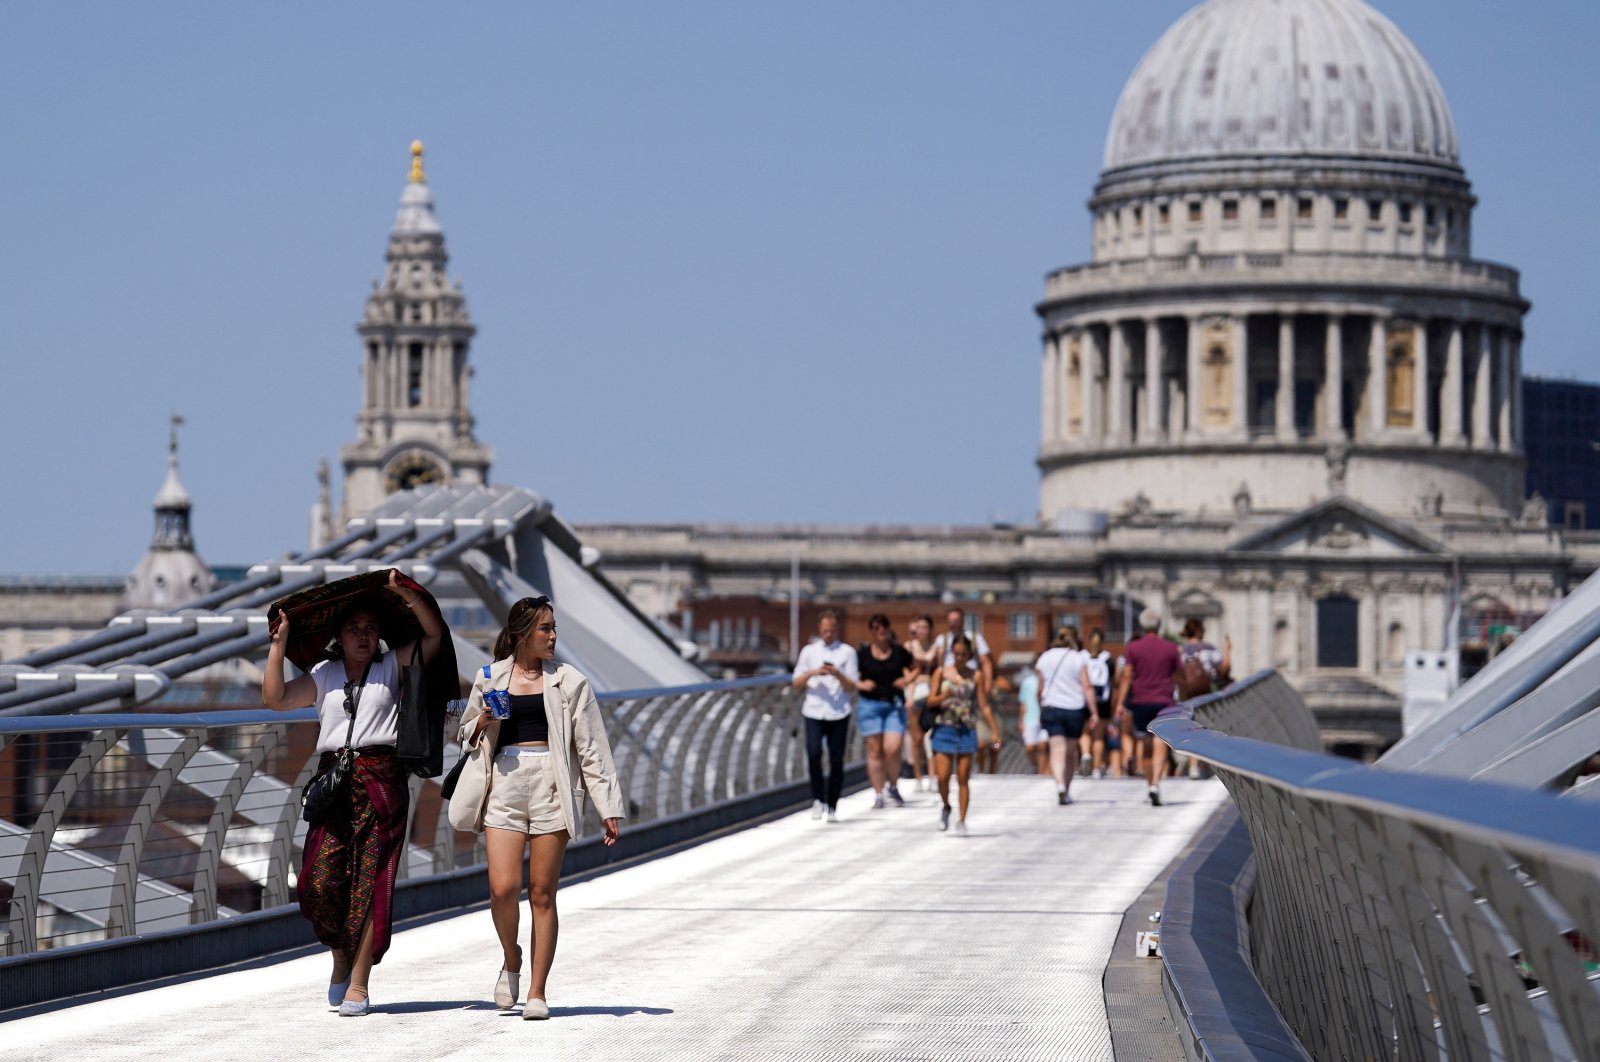 People cover themselves from the sun at Millennium Bridge during a heatwave, in London, U.K., July 18, 2022. (Reuters Photo)